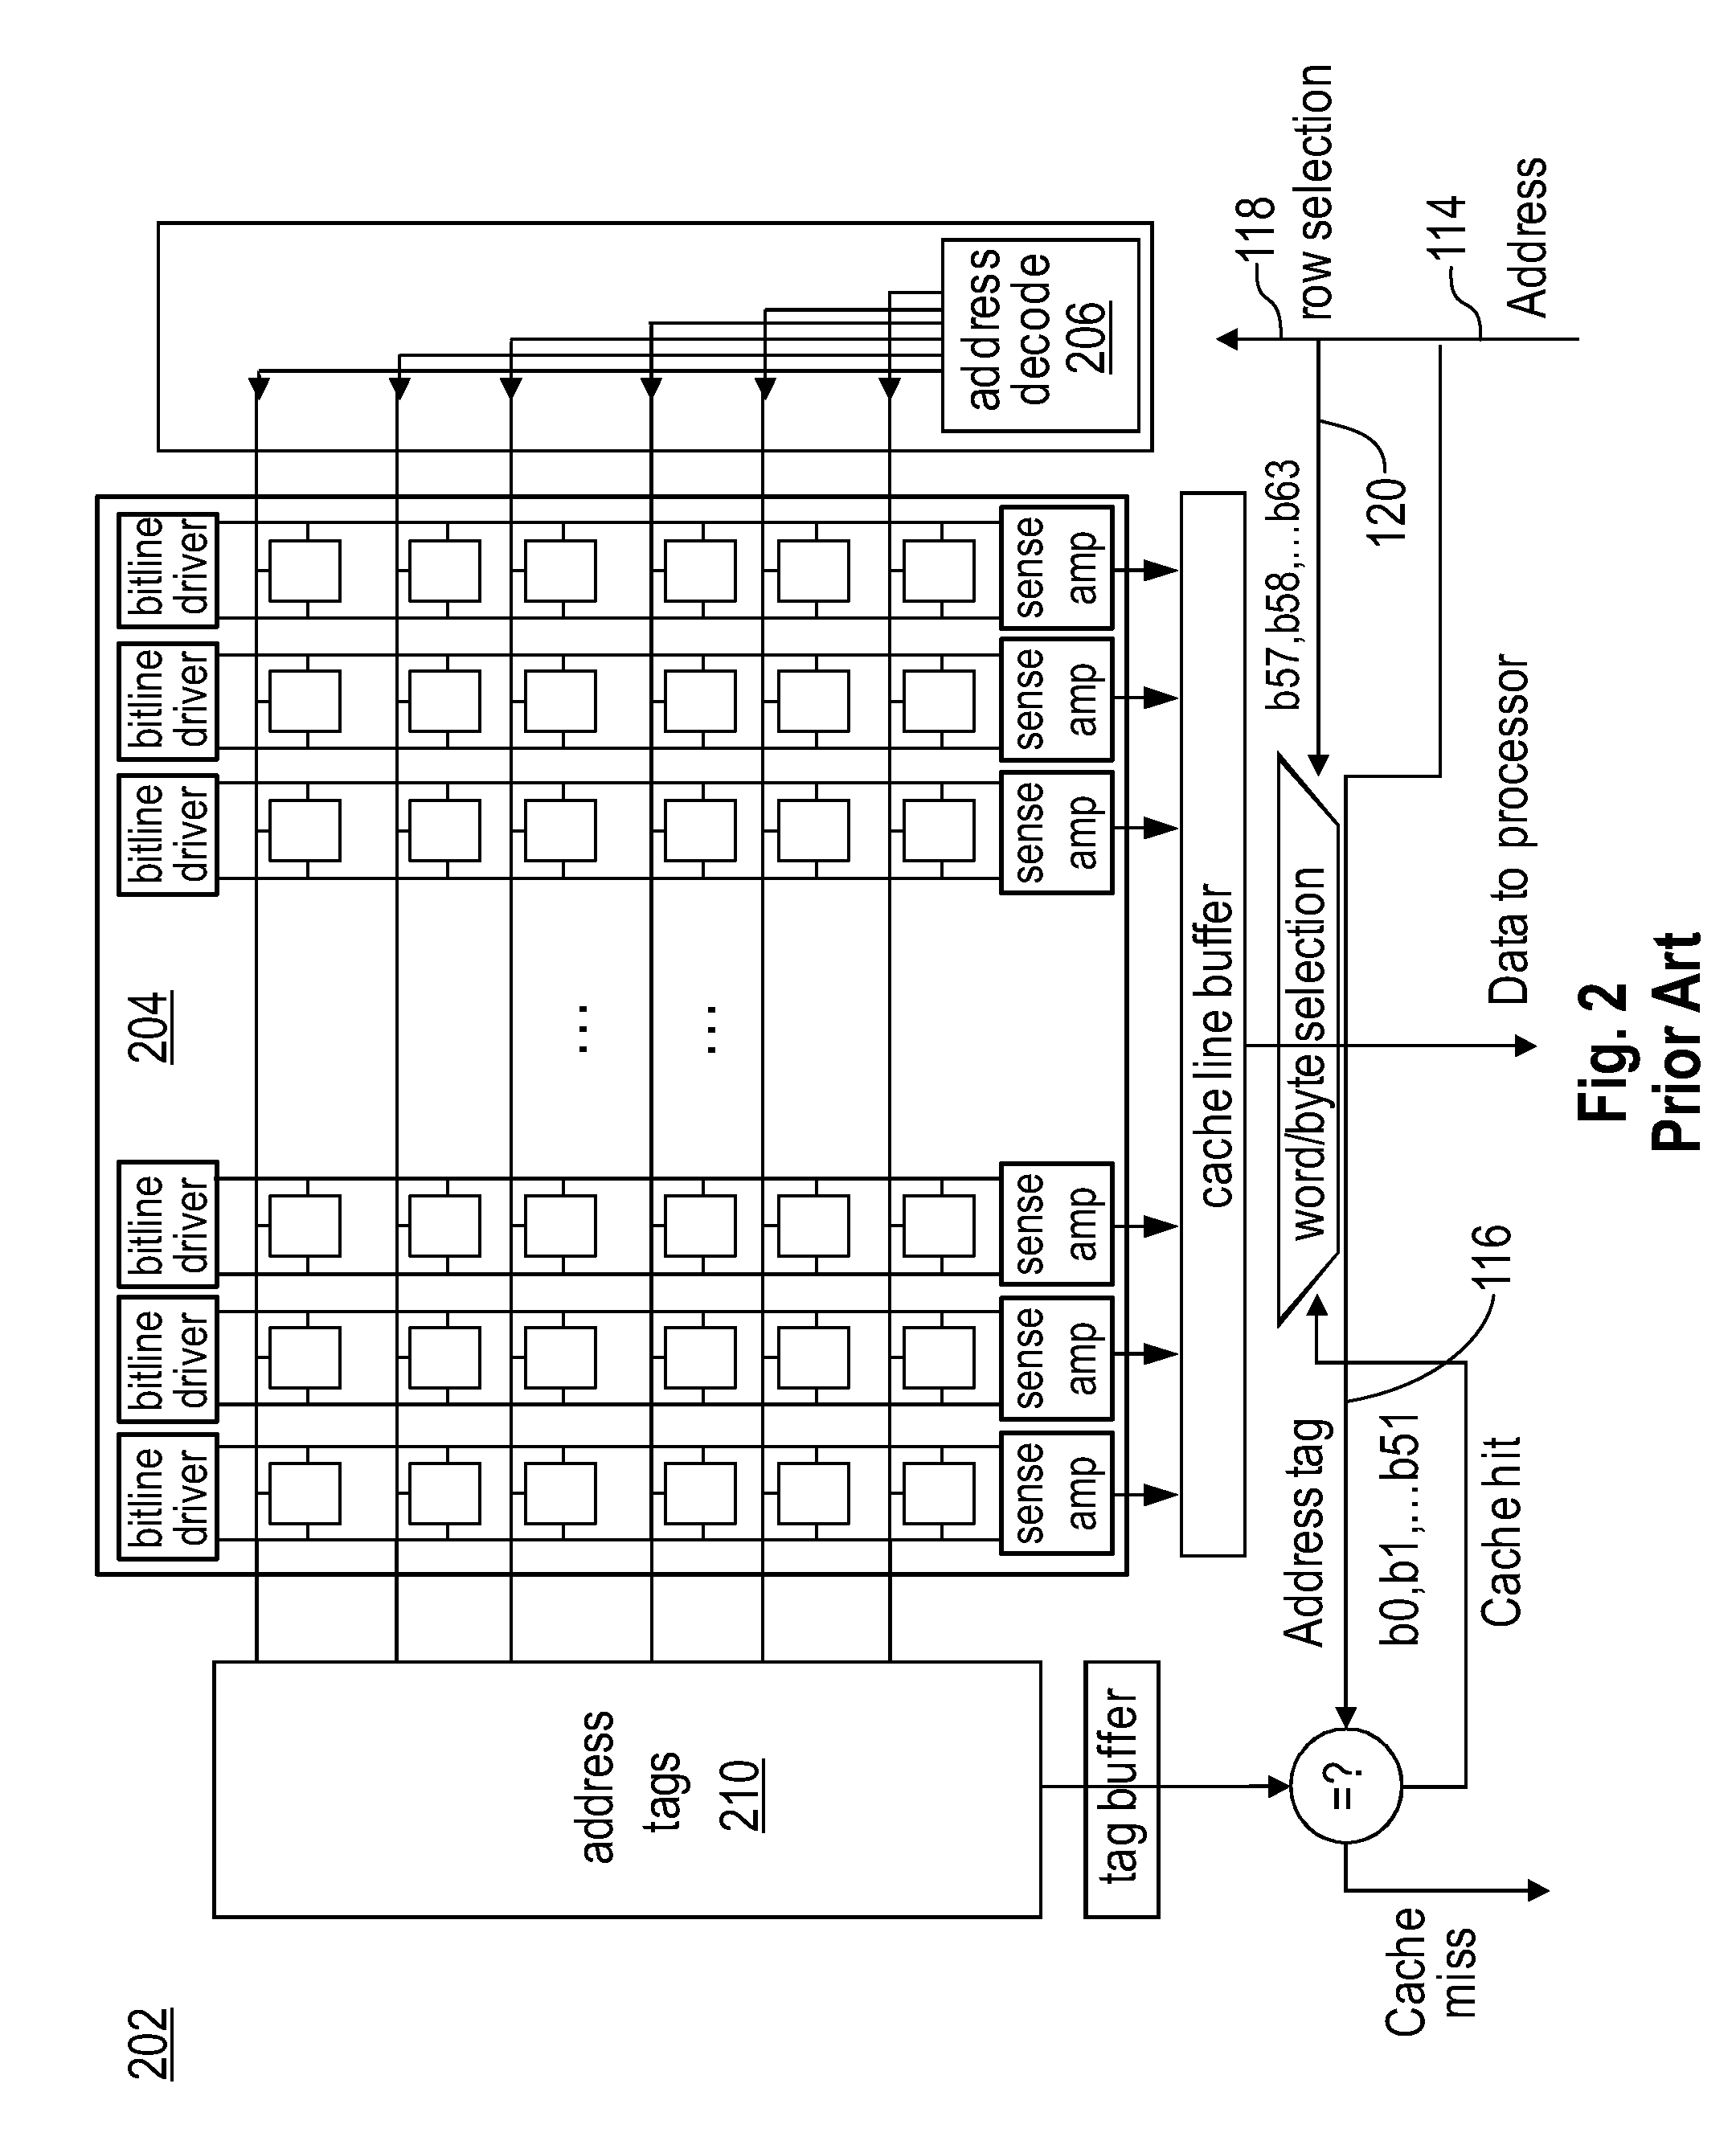 High performance unaligned cache access